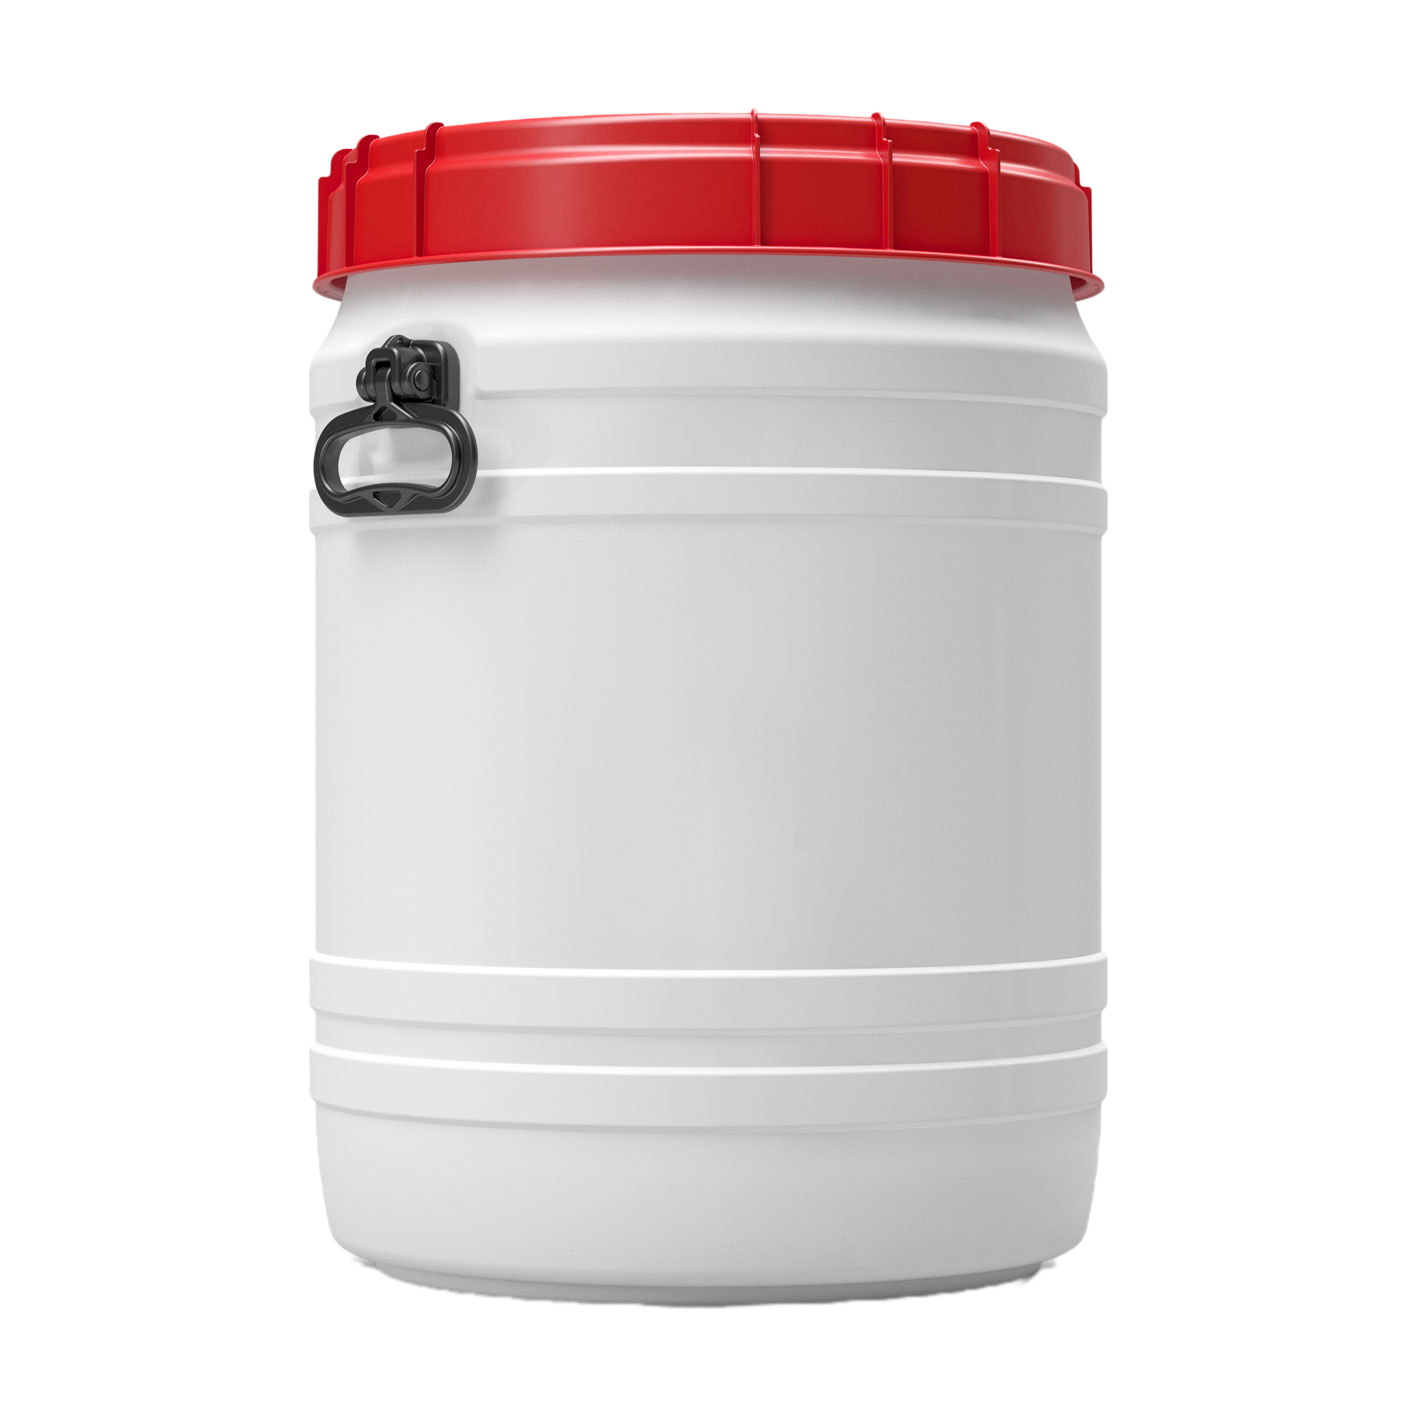 http://sddrums.com/wp-content/uploads/2014/05/6943-Total-opening-drum-with-mounted-handgrips-64-liter-white-red.png